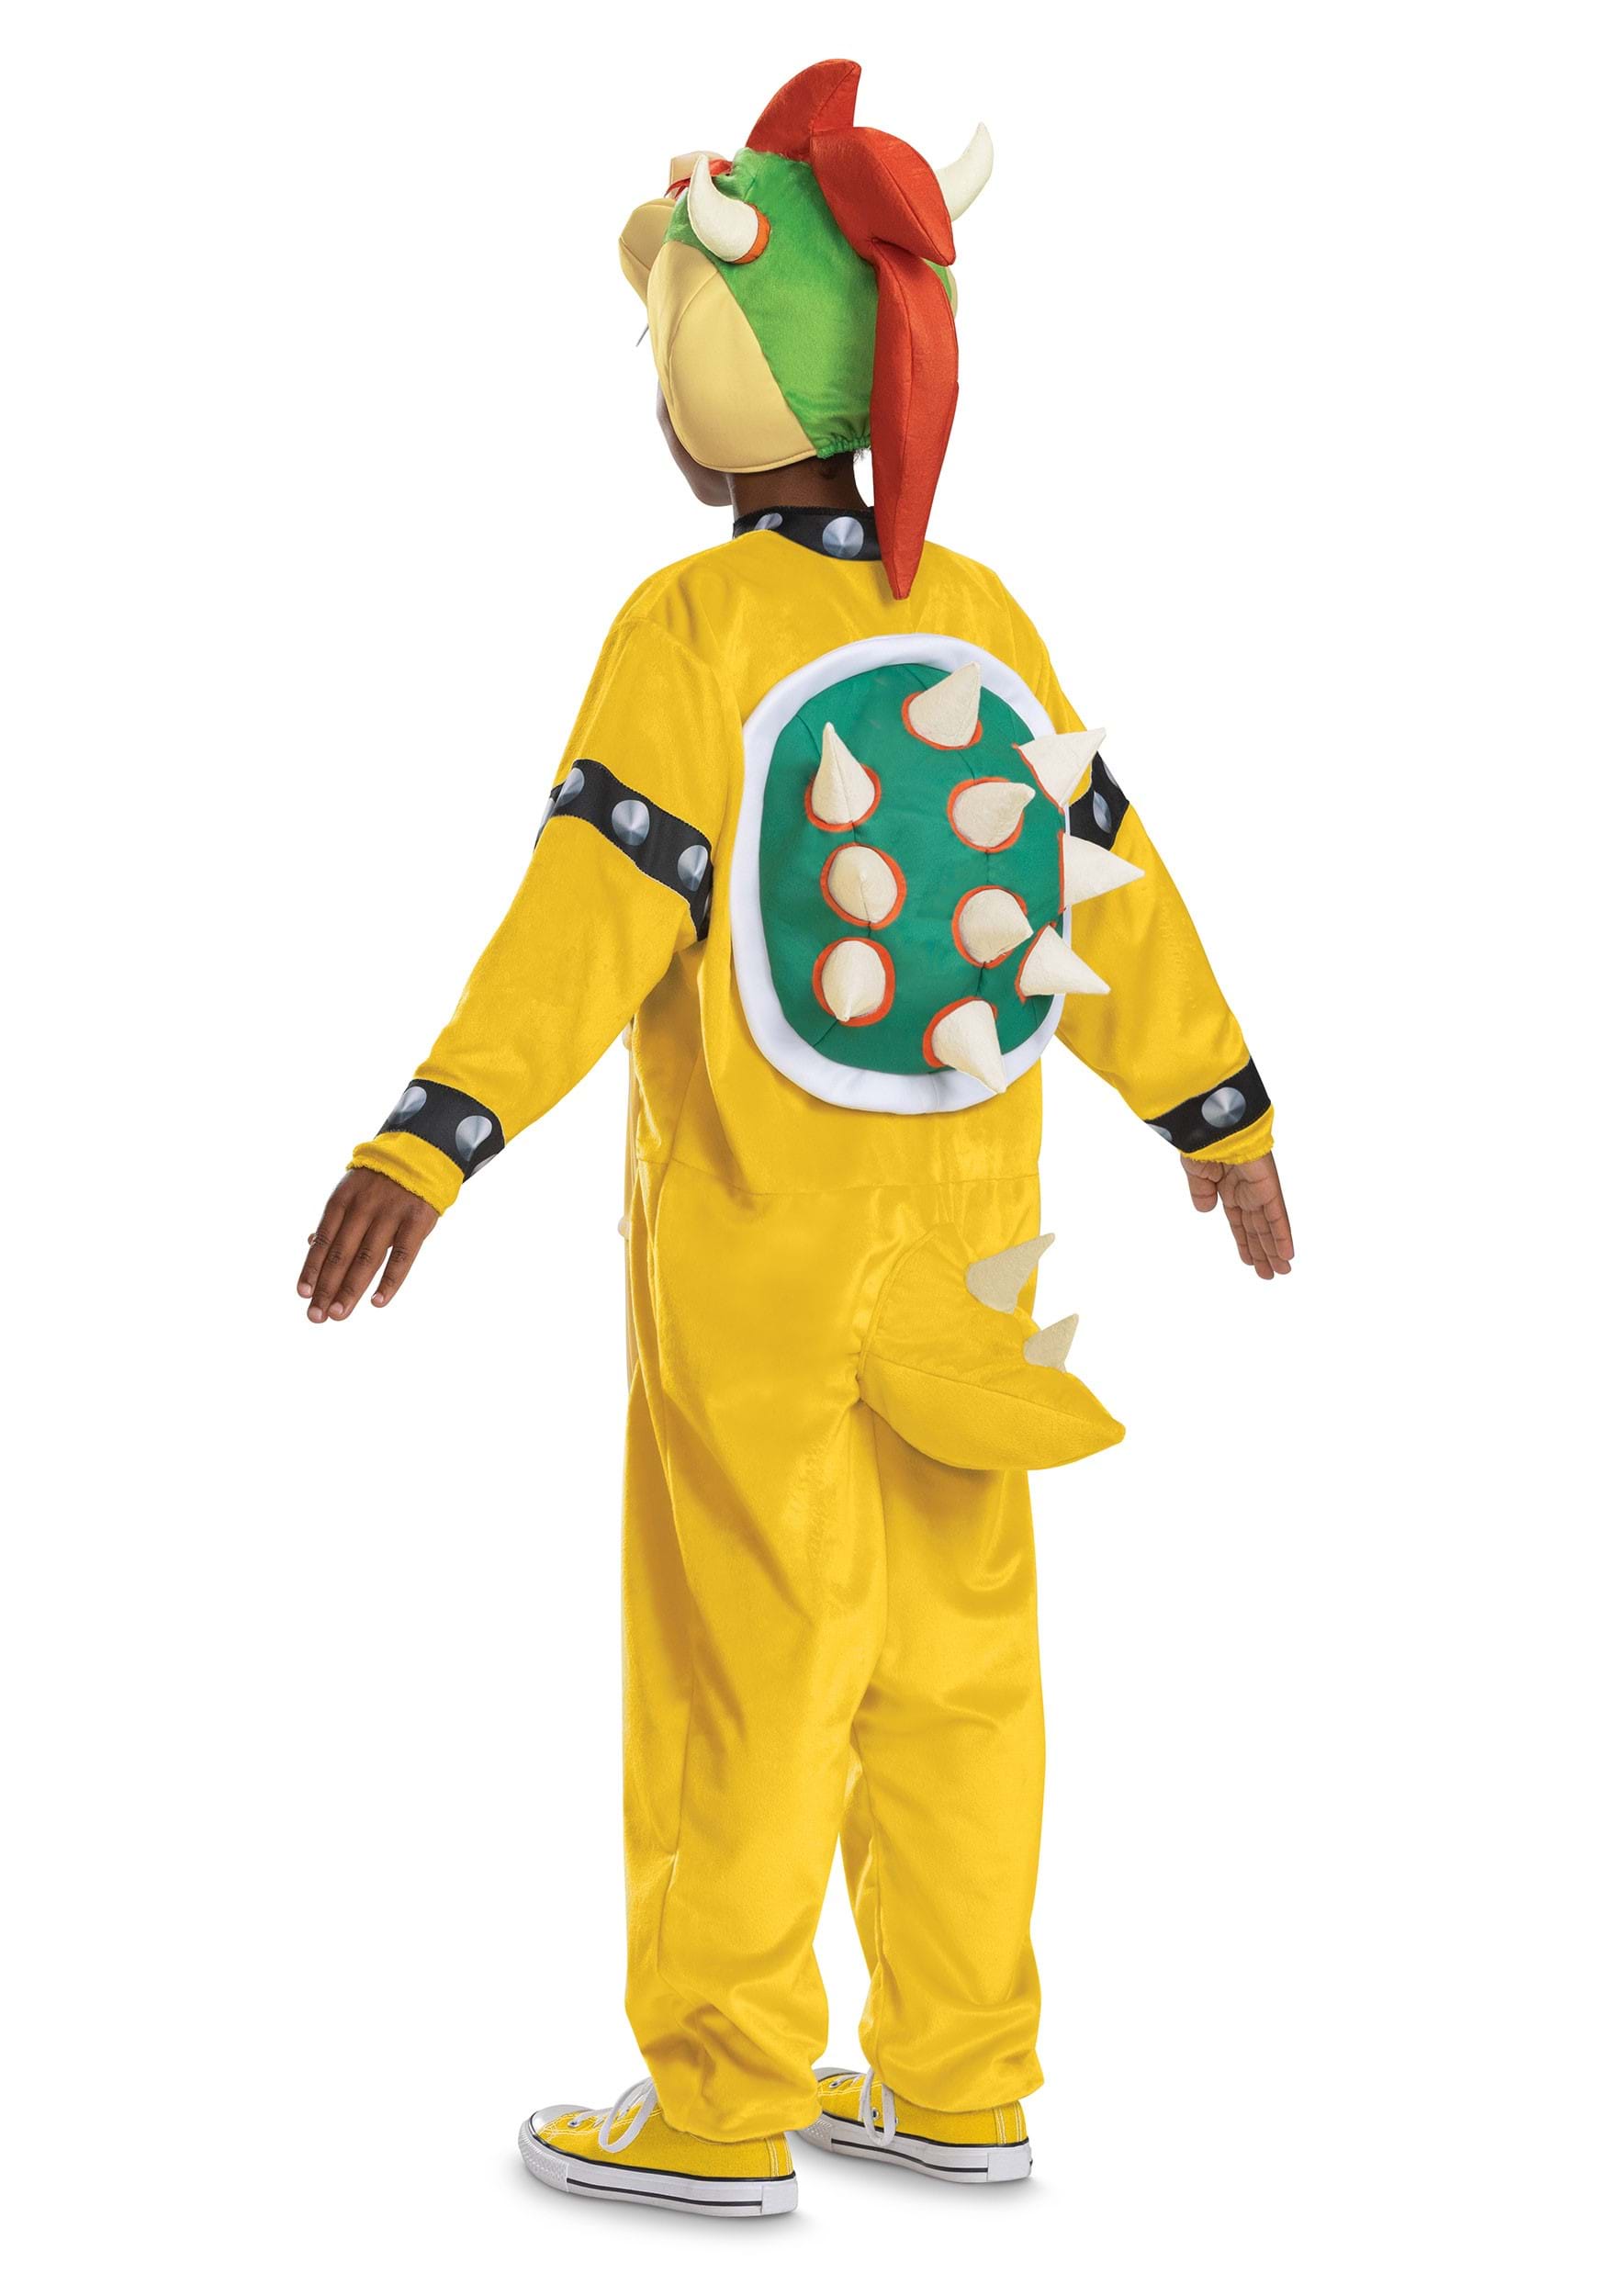 The Super Mario Bros. Movie Bowser Cosplay Costume Jumpsuit Party